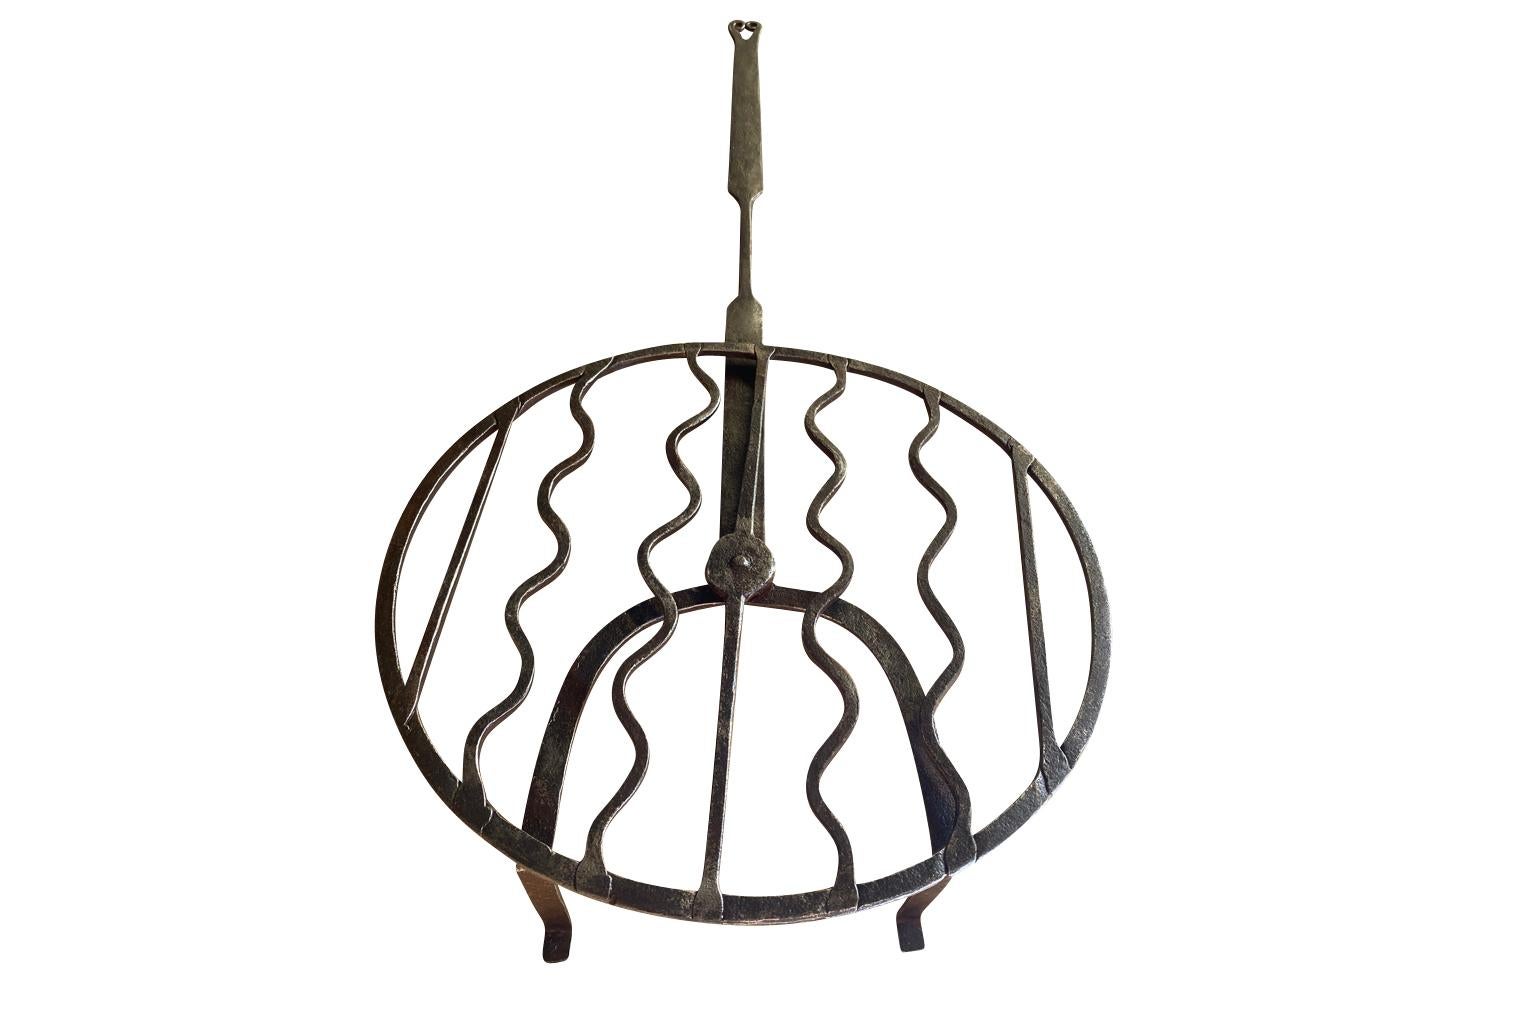 A wonderful 18th century Meat Cooker - Roaster from the Southwest of France.  Handsomely crafted in iron.  Pieces such as these were set in the fireplace and meat was placed on top to cook the meat.  The circular top rotates.  A terrific kitchen